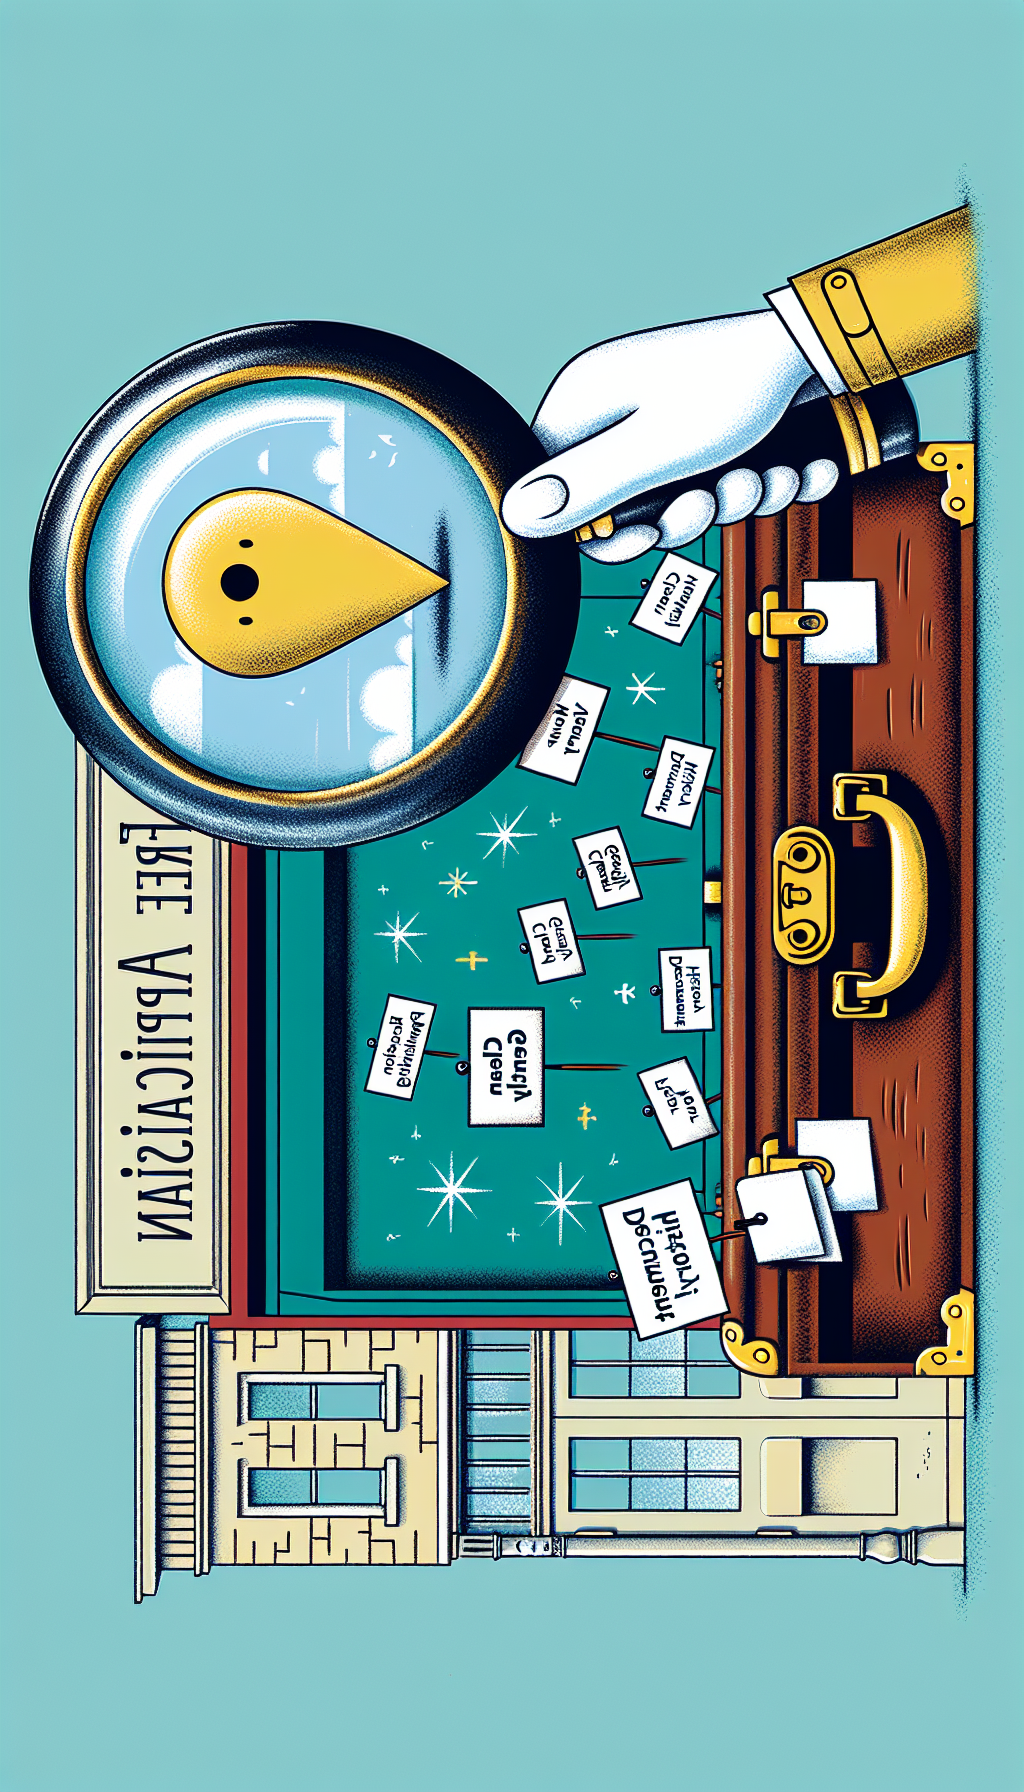 A whimsical illustration features a magnifying glass held by an illustrated map pin hovering over a vintage trunk overflowing with antiques, each tagged with tips like "Clean Gently" and "Document History." Nearby, a speech bubble with the word "Free Appraisal Here!" pops from a classic storefront, suggesting a local service, inviting viewers to a nearby treasure trove of valuation.